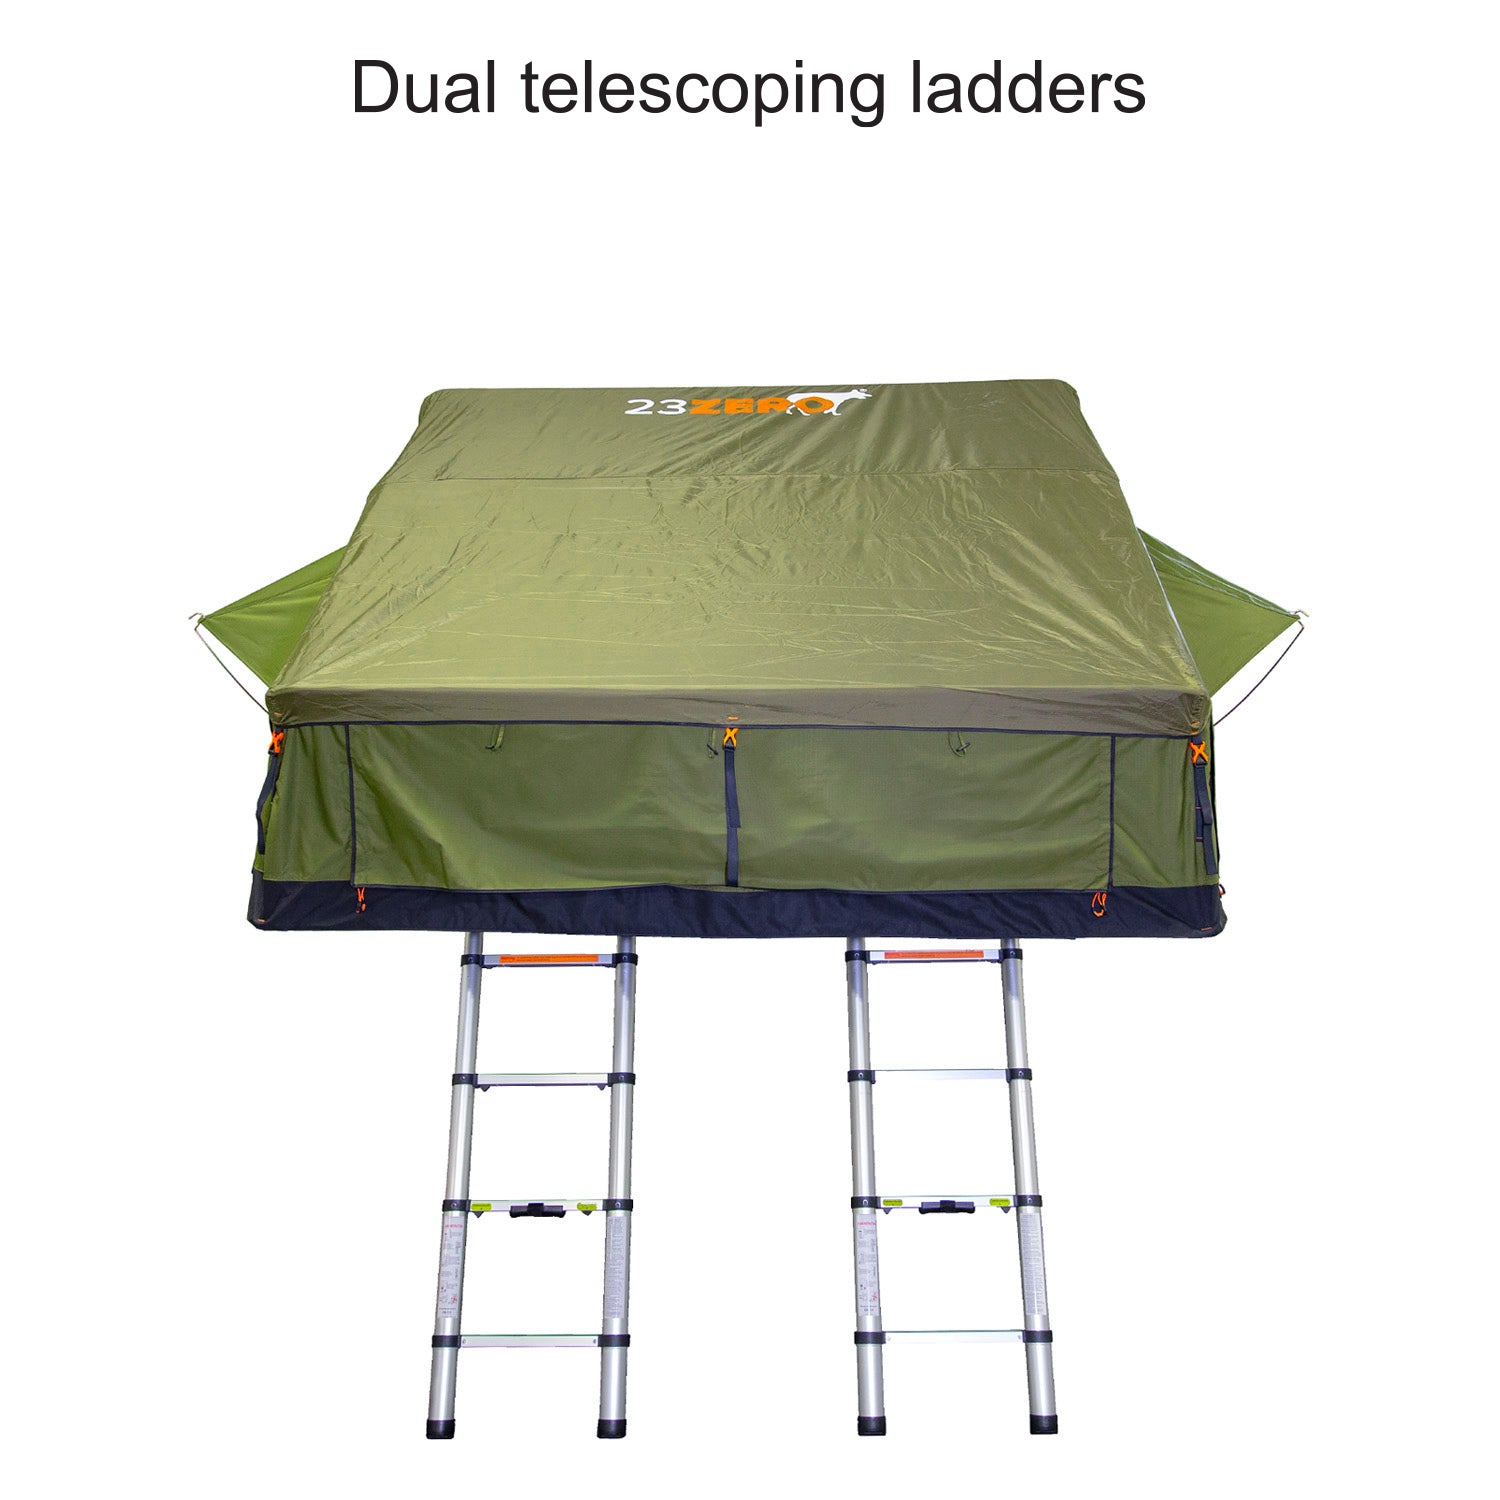 Tent Telescoping ladders view